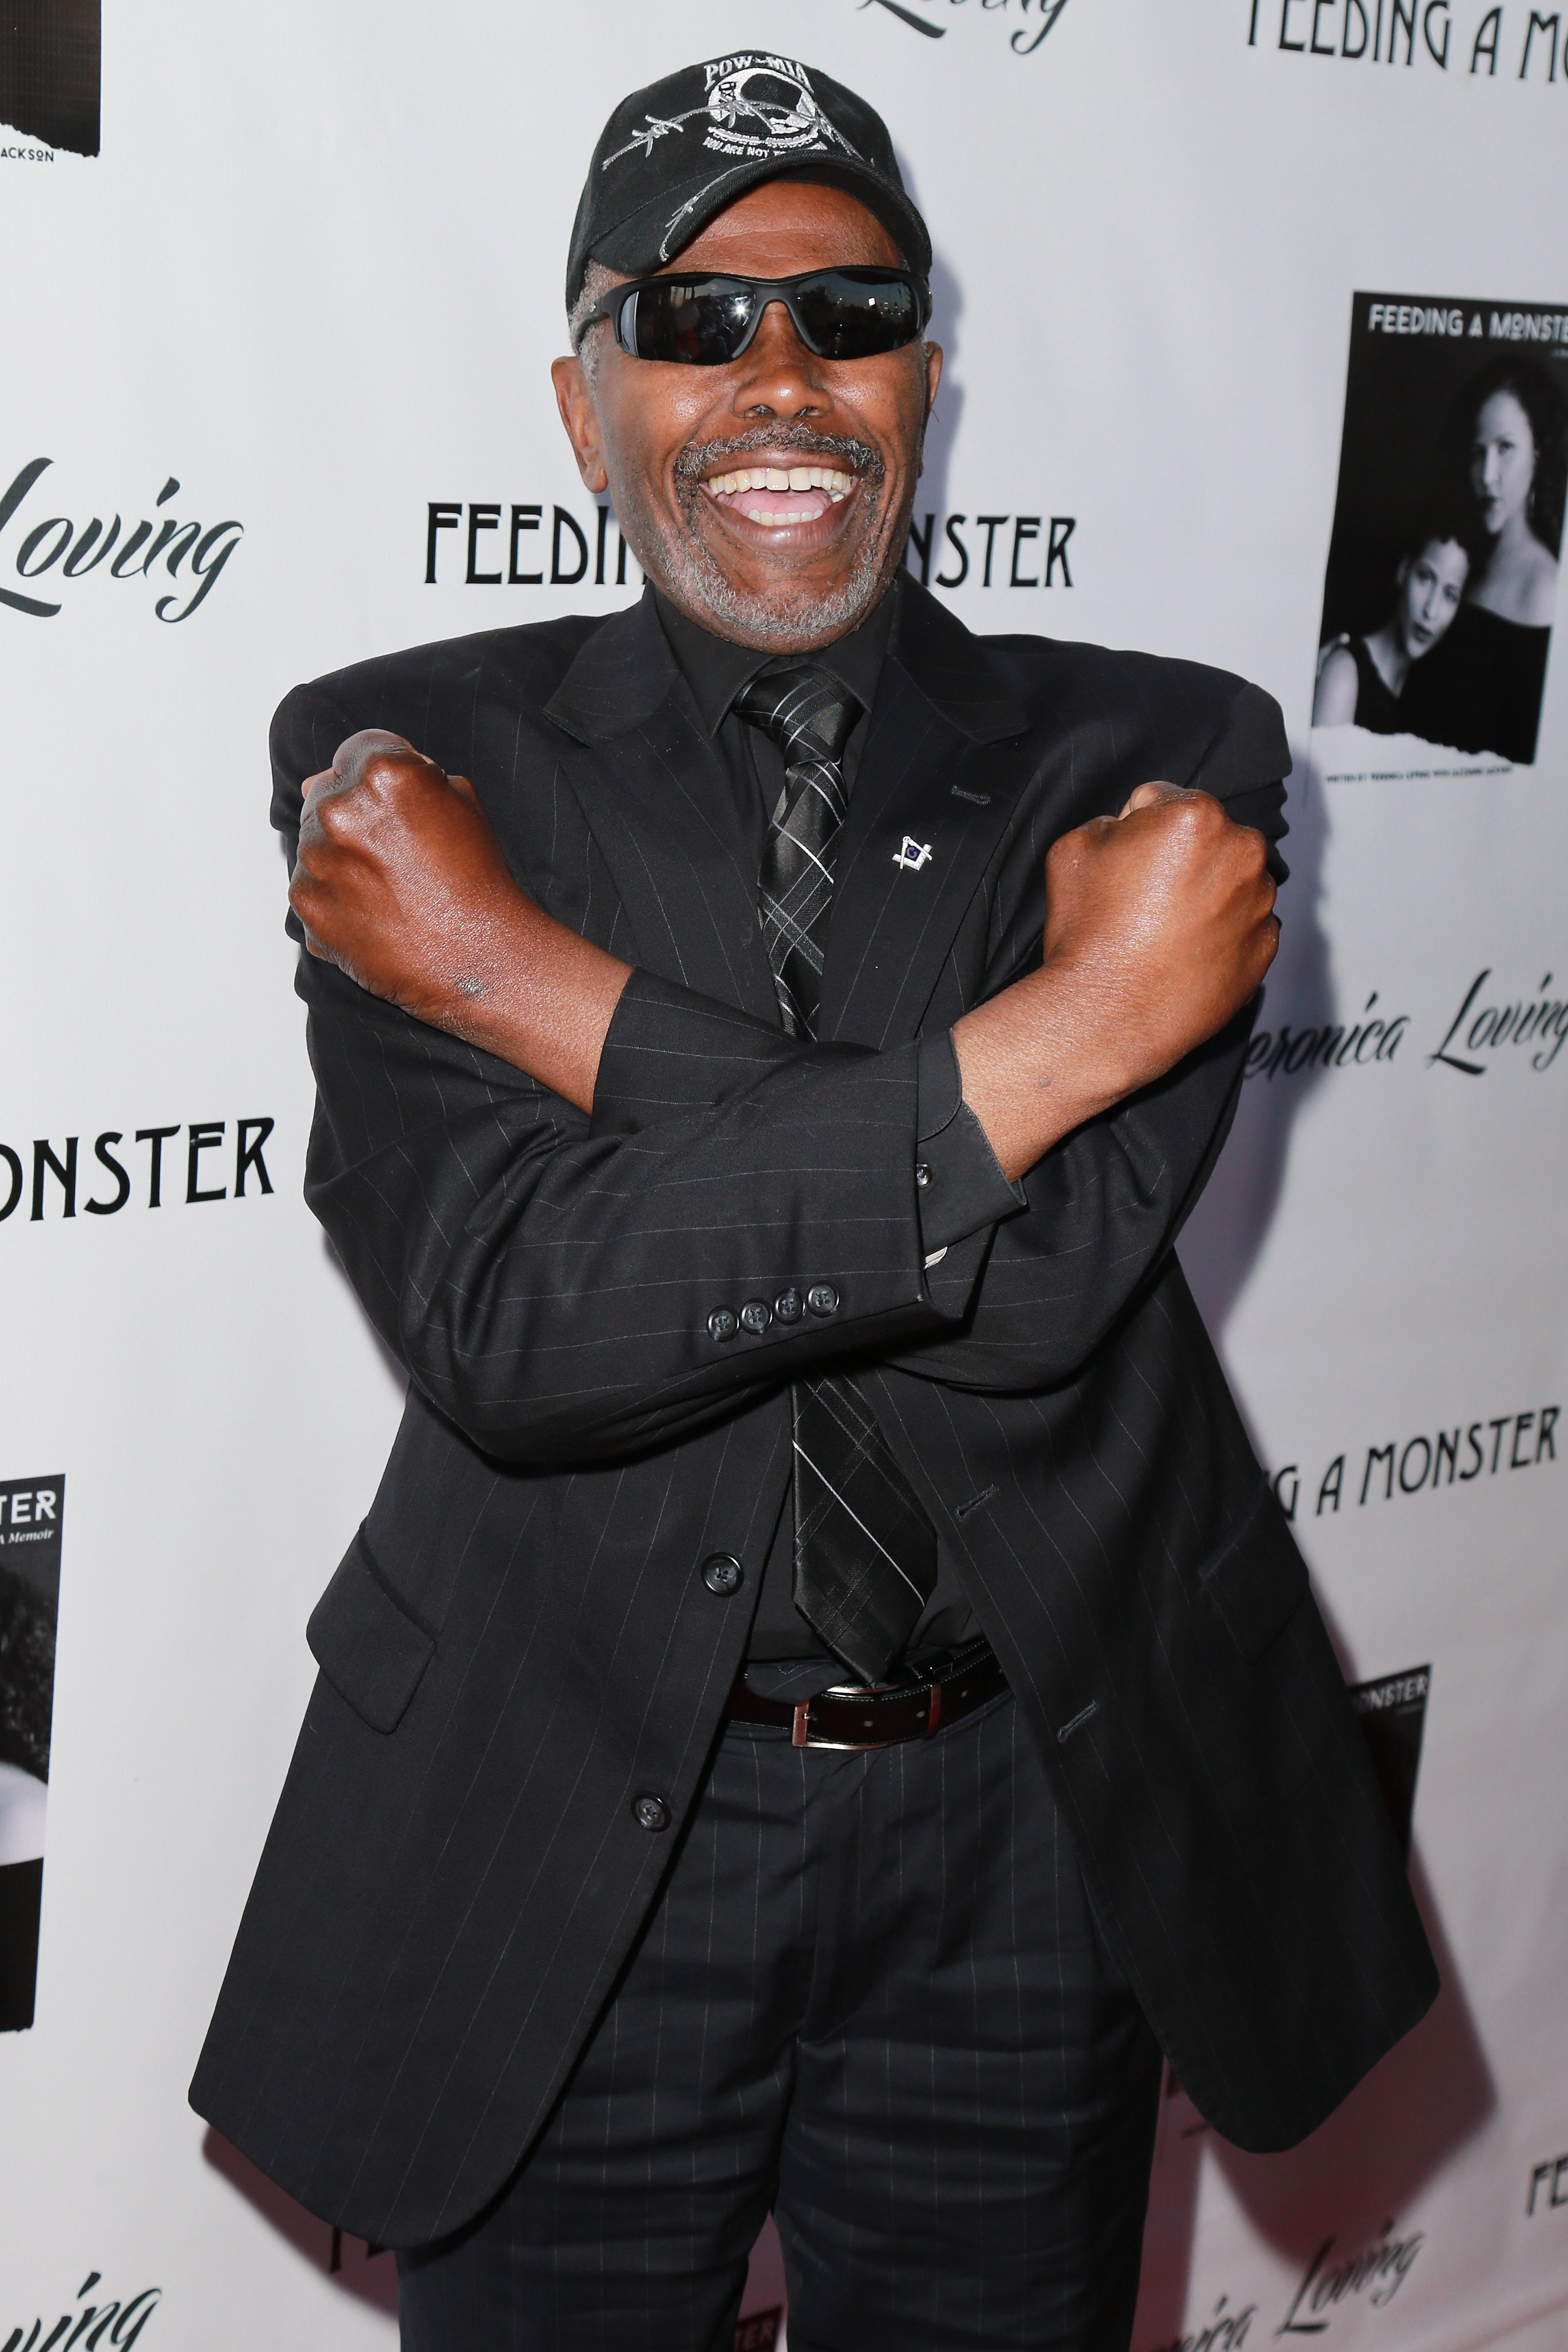 Actor Ernest Lee Thomas attends the Opening Premiere & Cocktail Hour Of New Stage Play "Feeding A Monster" on April 20, 2018 |Photo: Getty Images